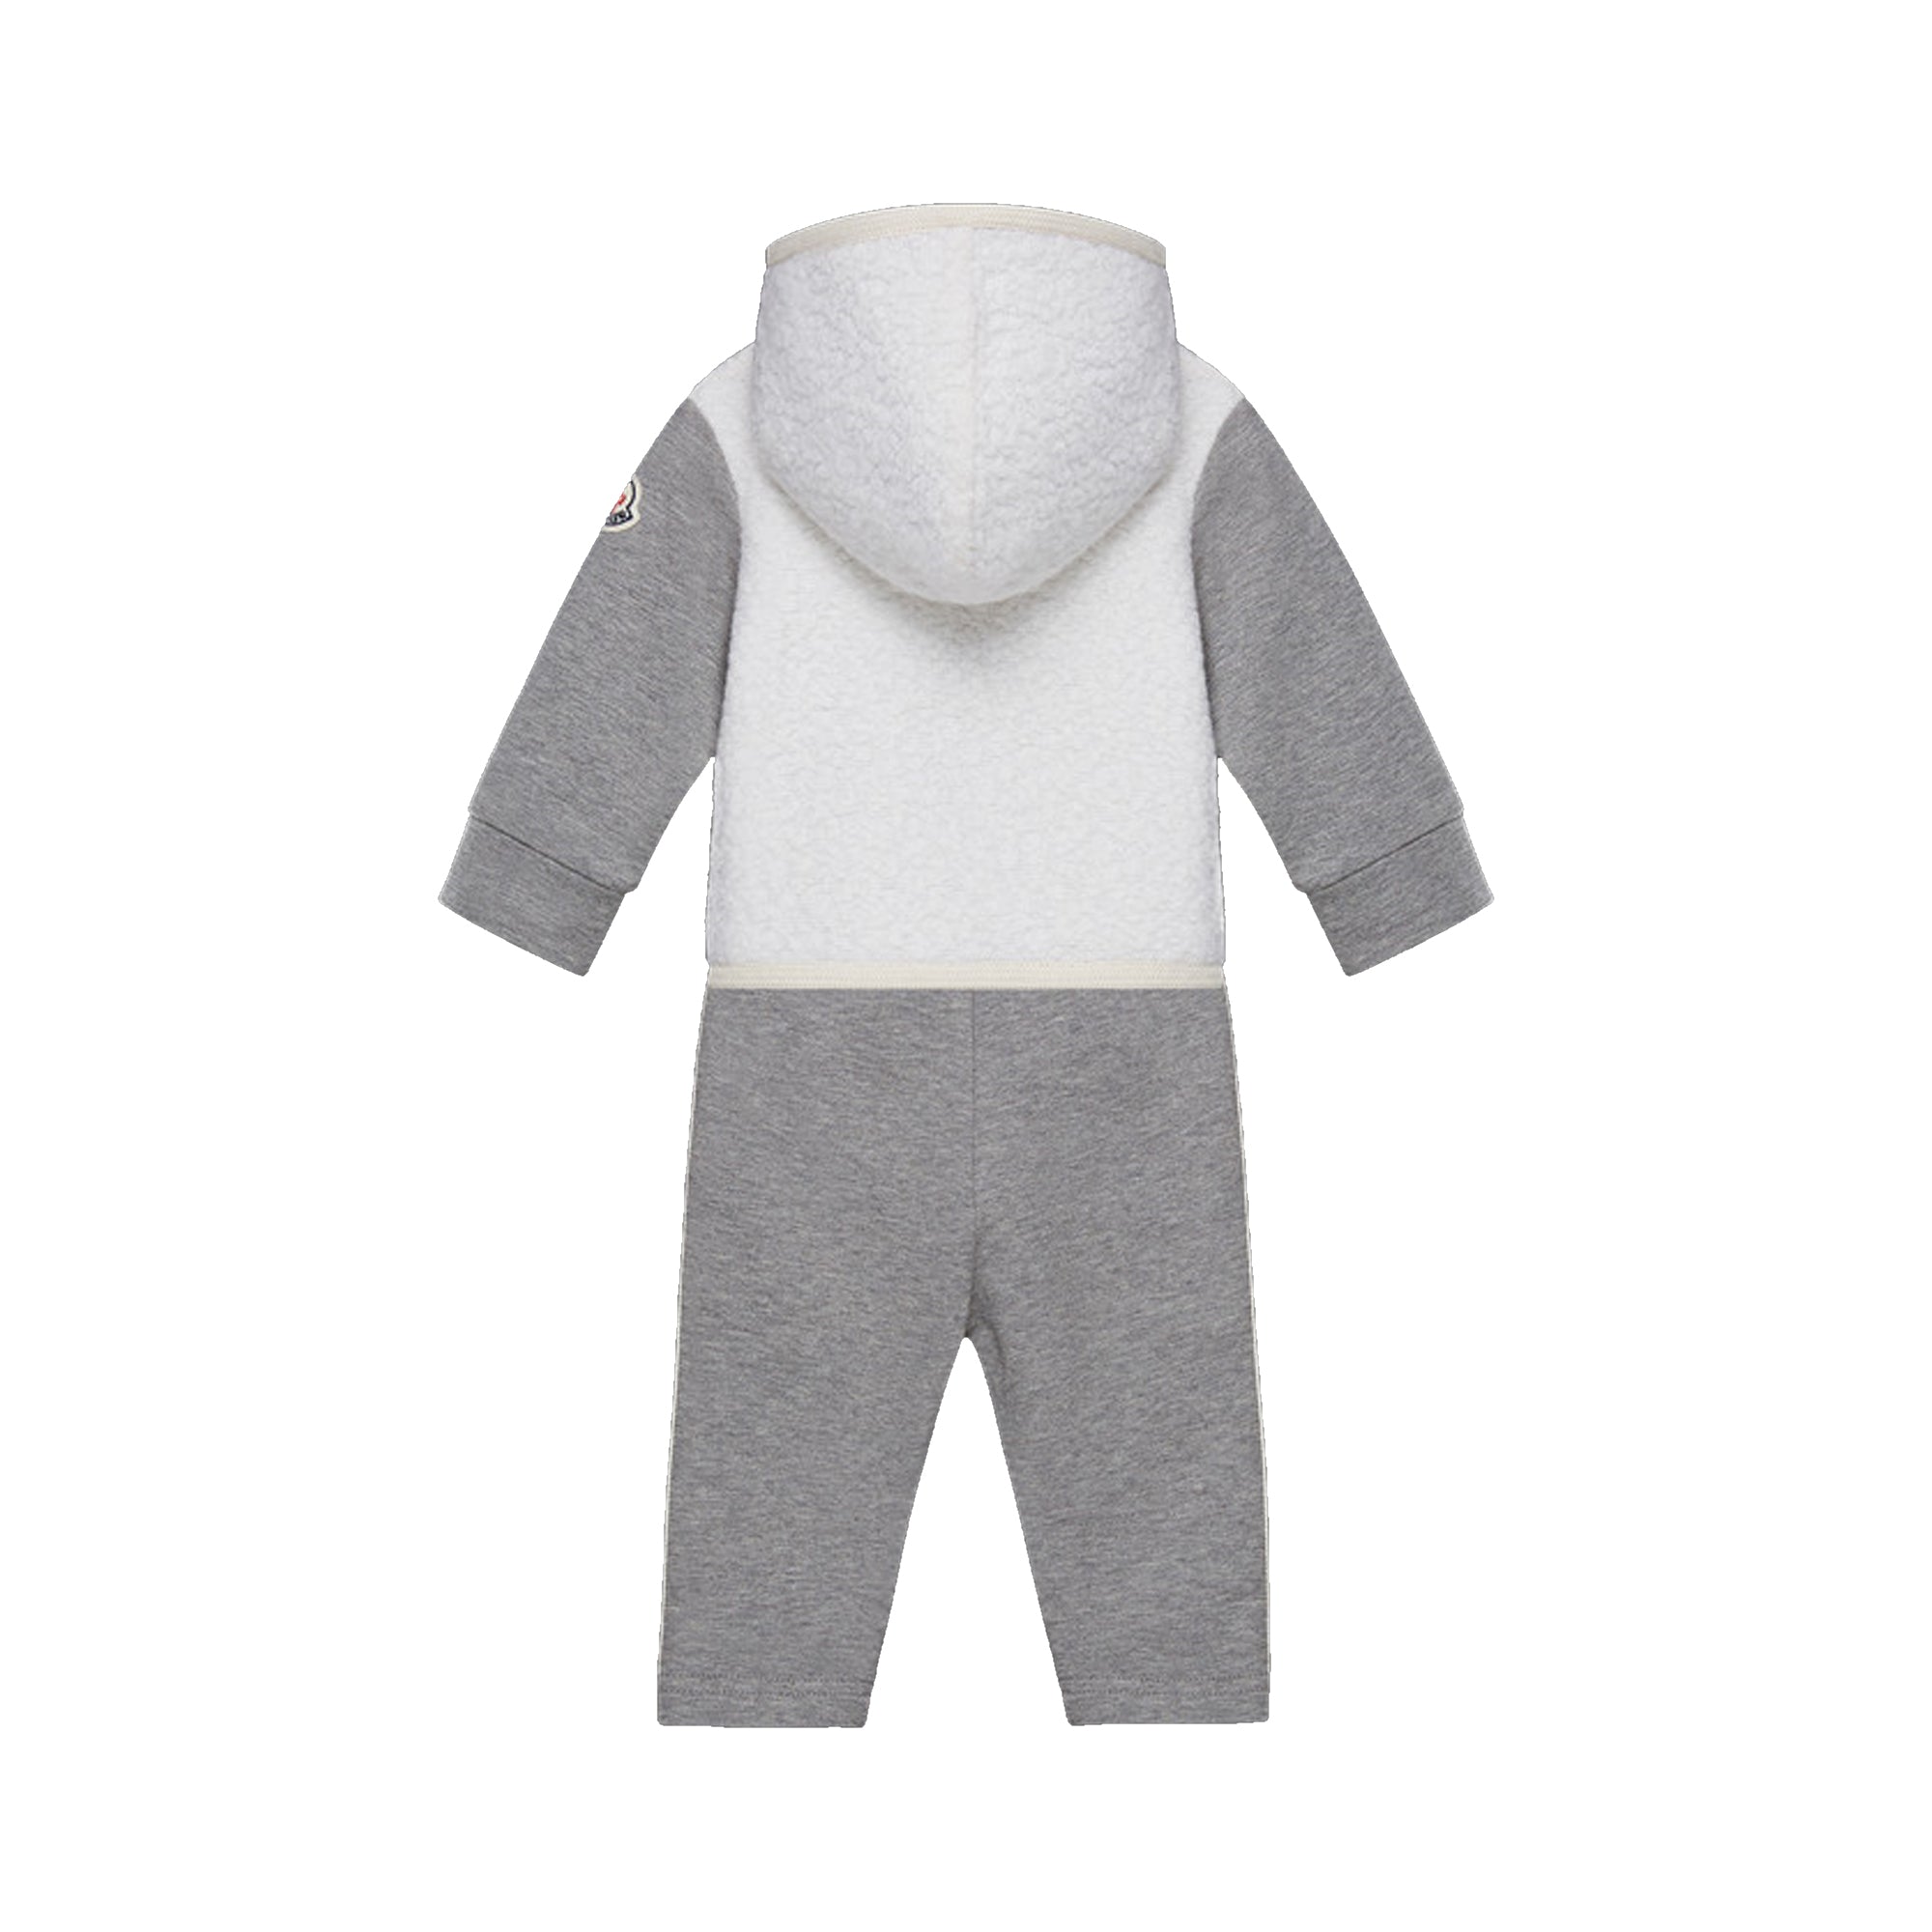 Baby "COMPLETO MAGLIA" Virgin Wool Sets